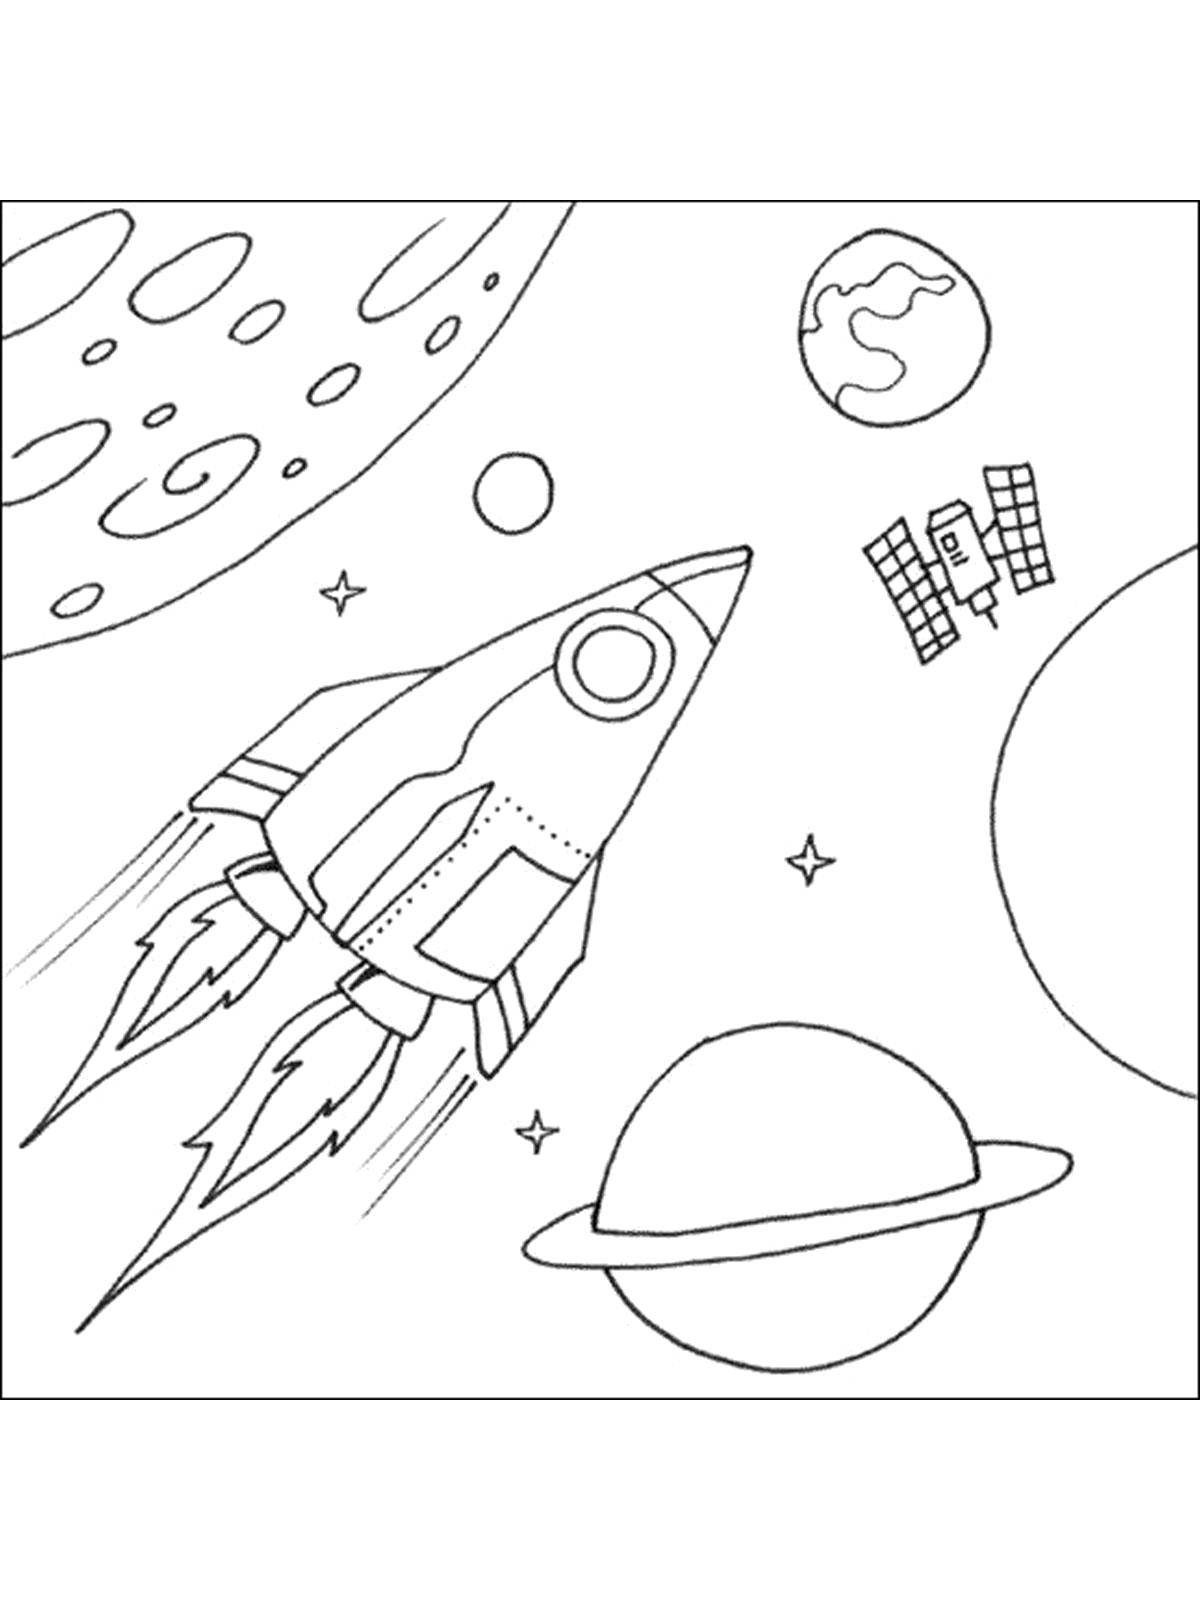 Coloring The rocket flies in space between the planets and satellites. Category space. Tags:  Have kosmak, planet, universe, Galaxy, Crescent, Moon, stars, rocket.